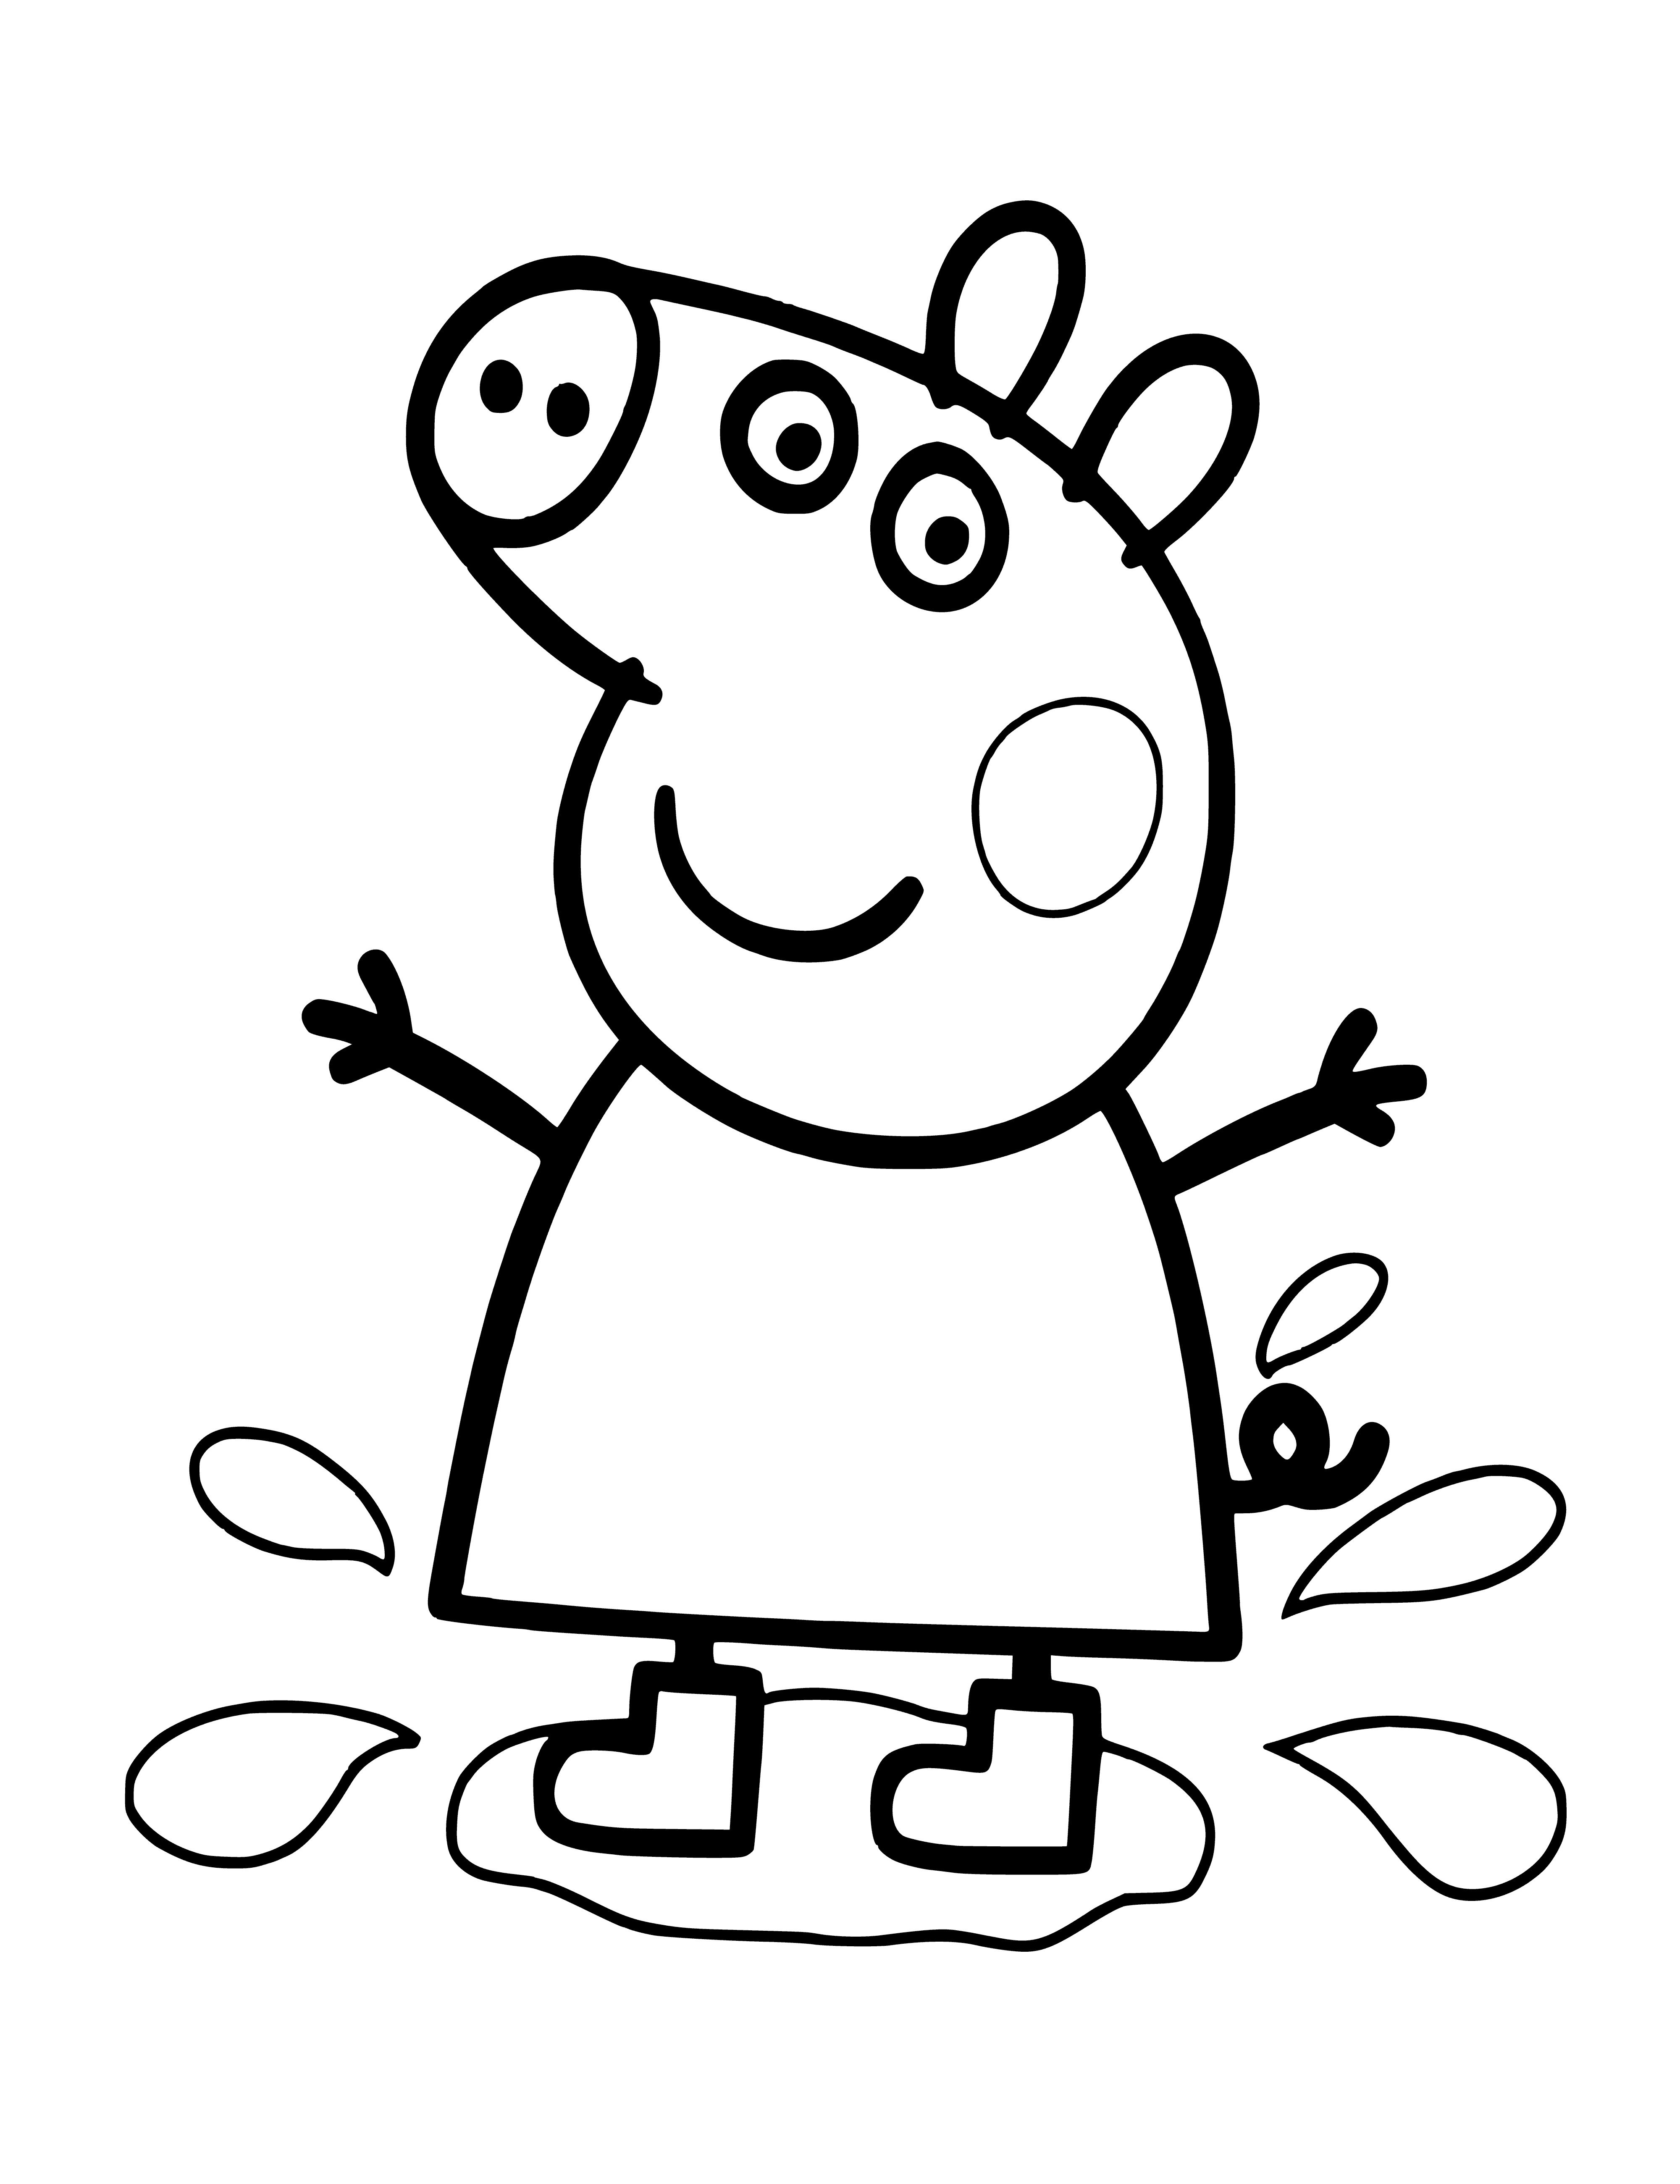 coloring page: Peppa Pig is wearing a raincoat and boots, splashing in a puddle.